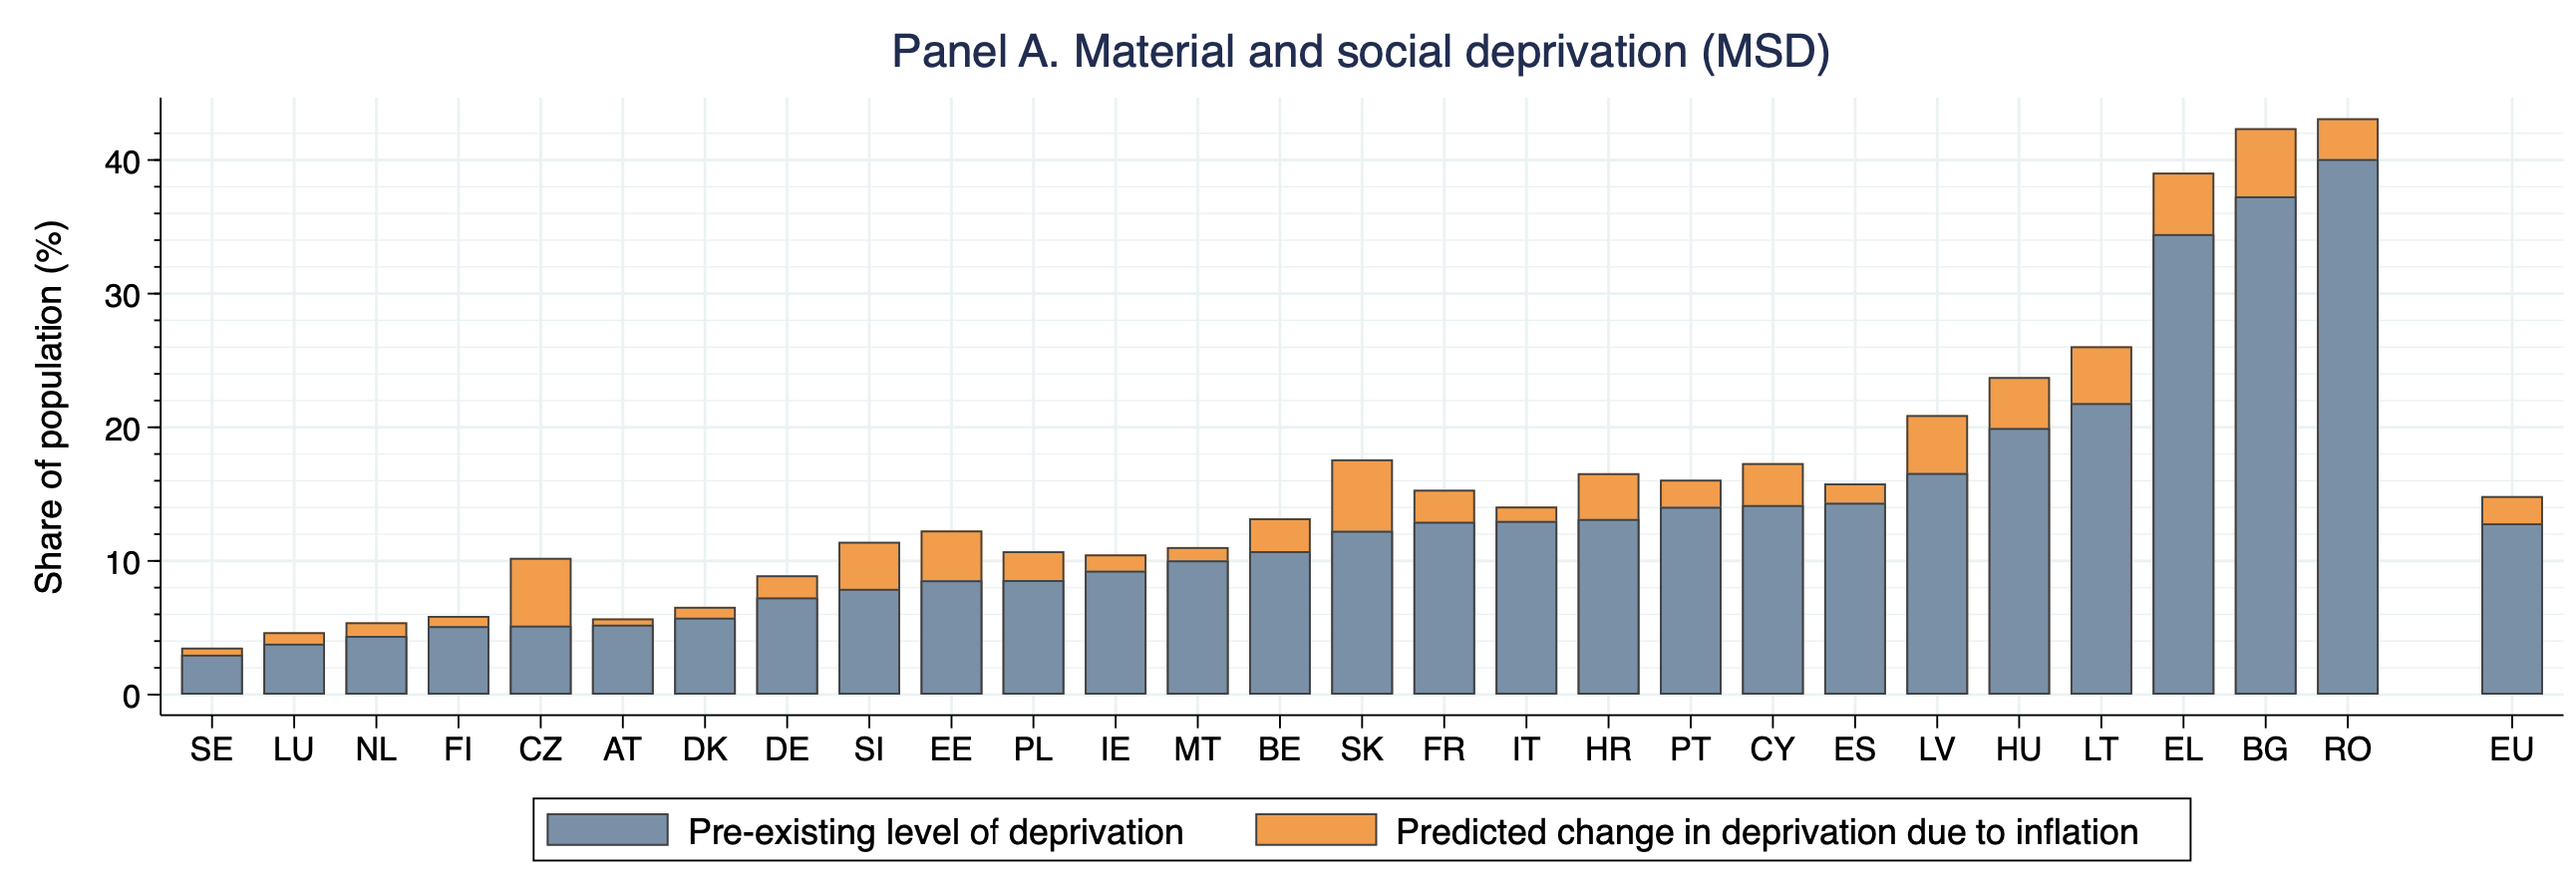 Figure 2a The predicted effects of inflation on material and social deprivation across the EU